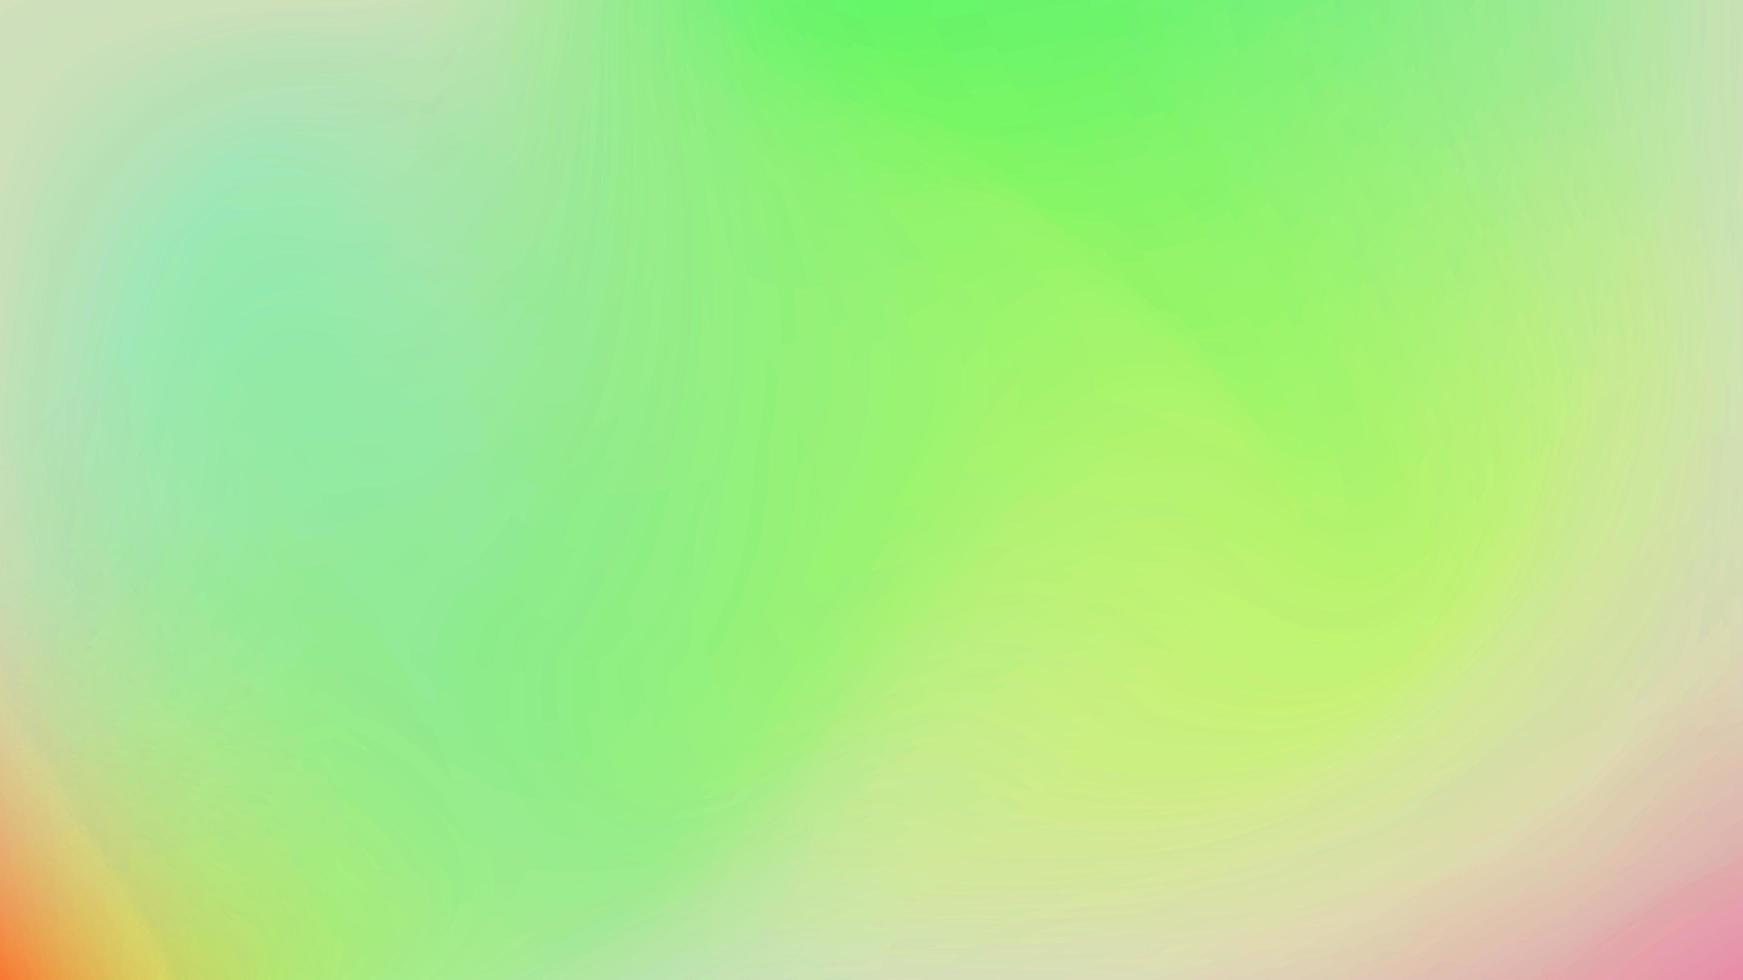 abstract shiny light green and orange blurred gradient bubble circle colorful bright pattern with smooth graphic gradient. photo